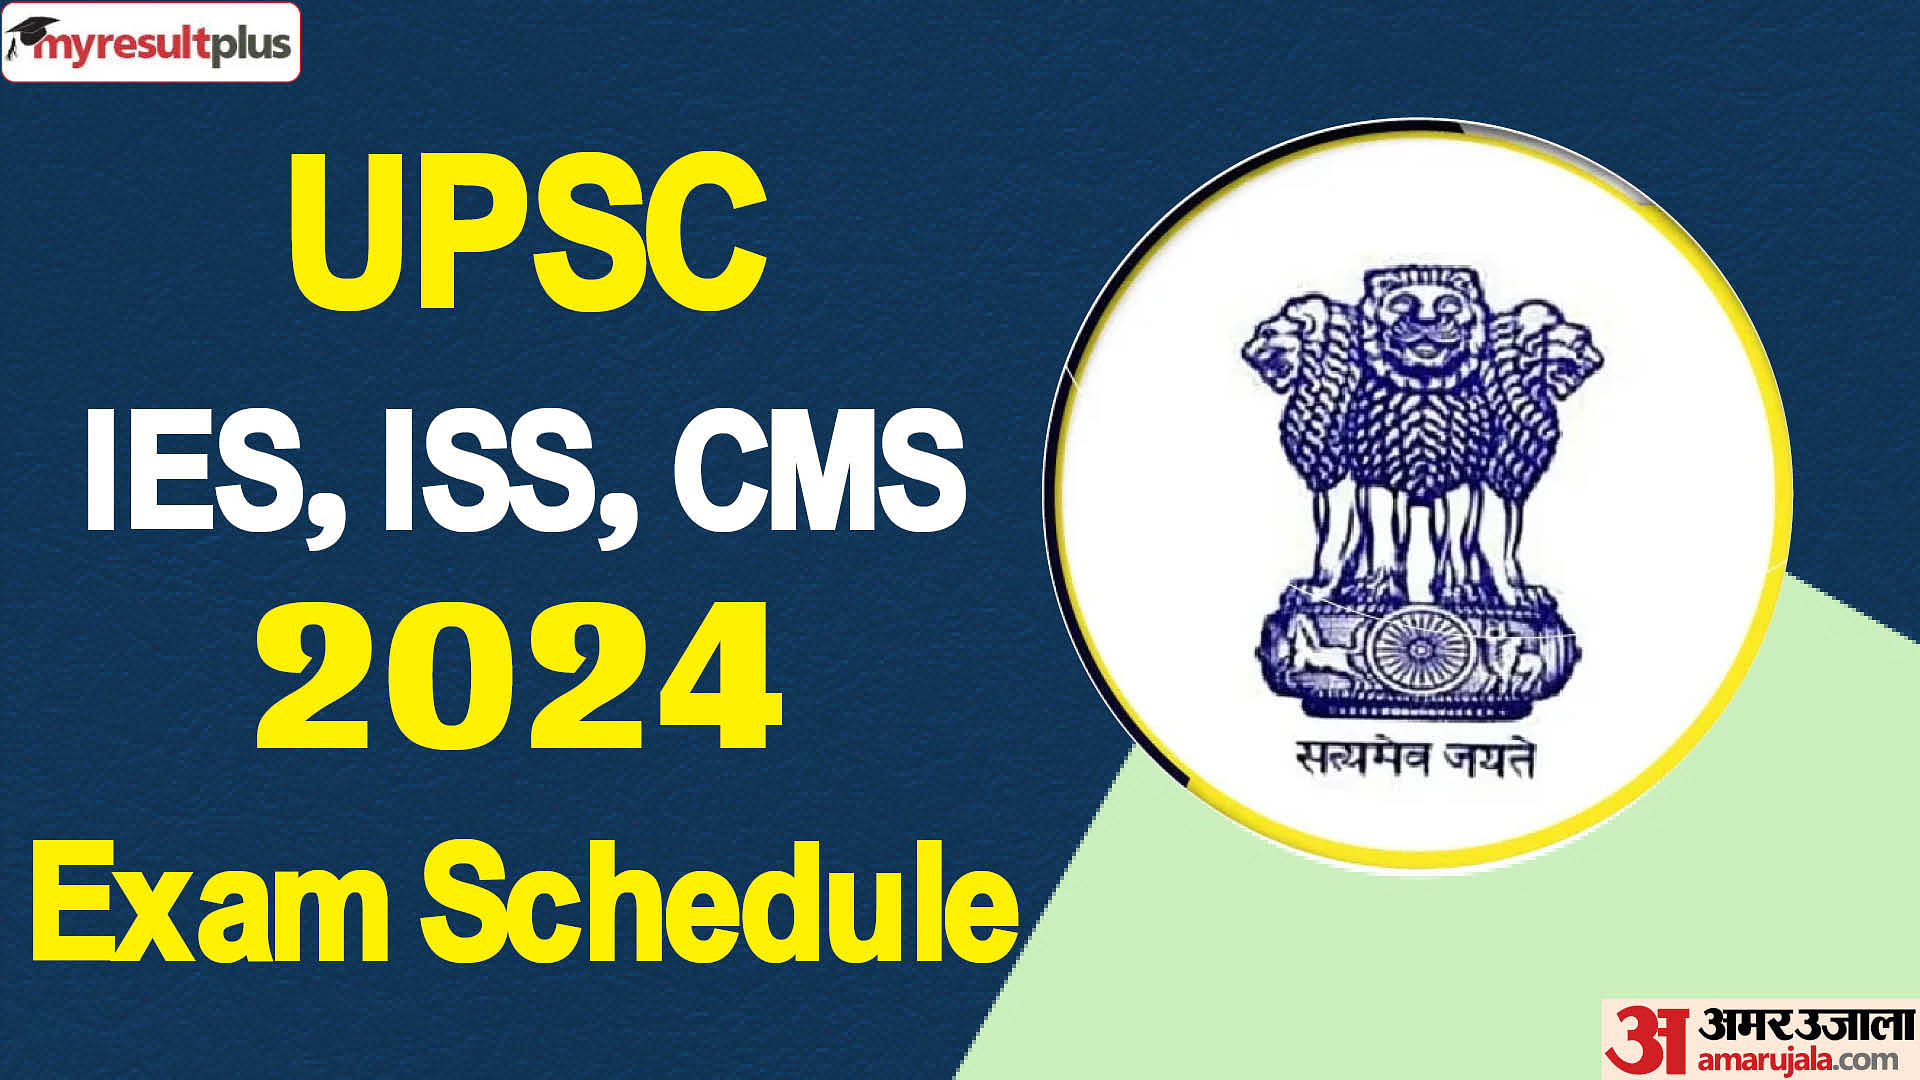 UPSC IES, ISS, CMS 2024 Exam Schedule released, Read the exam dates and timing here